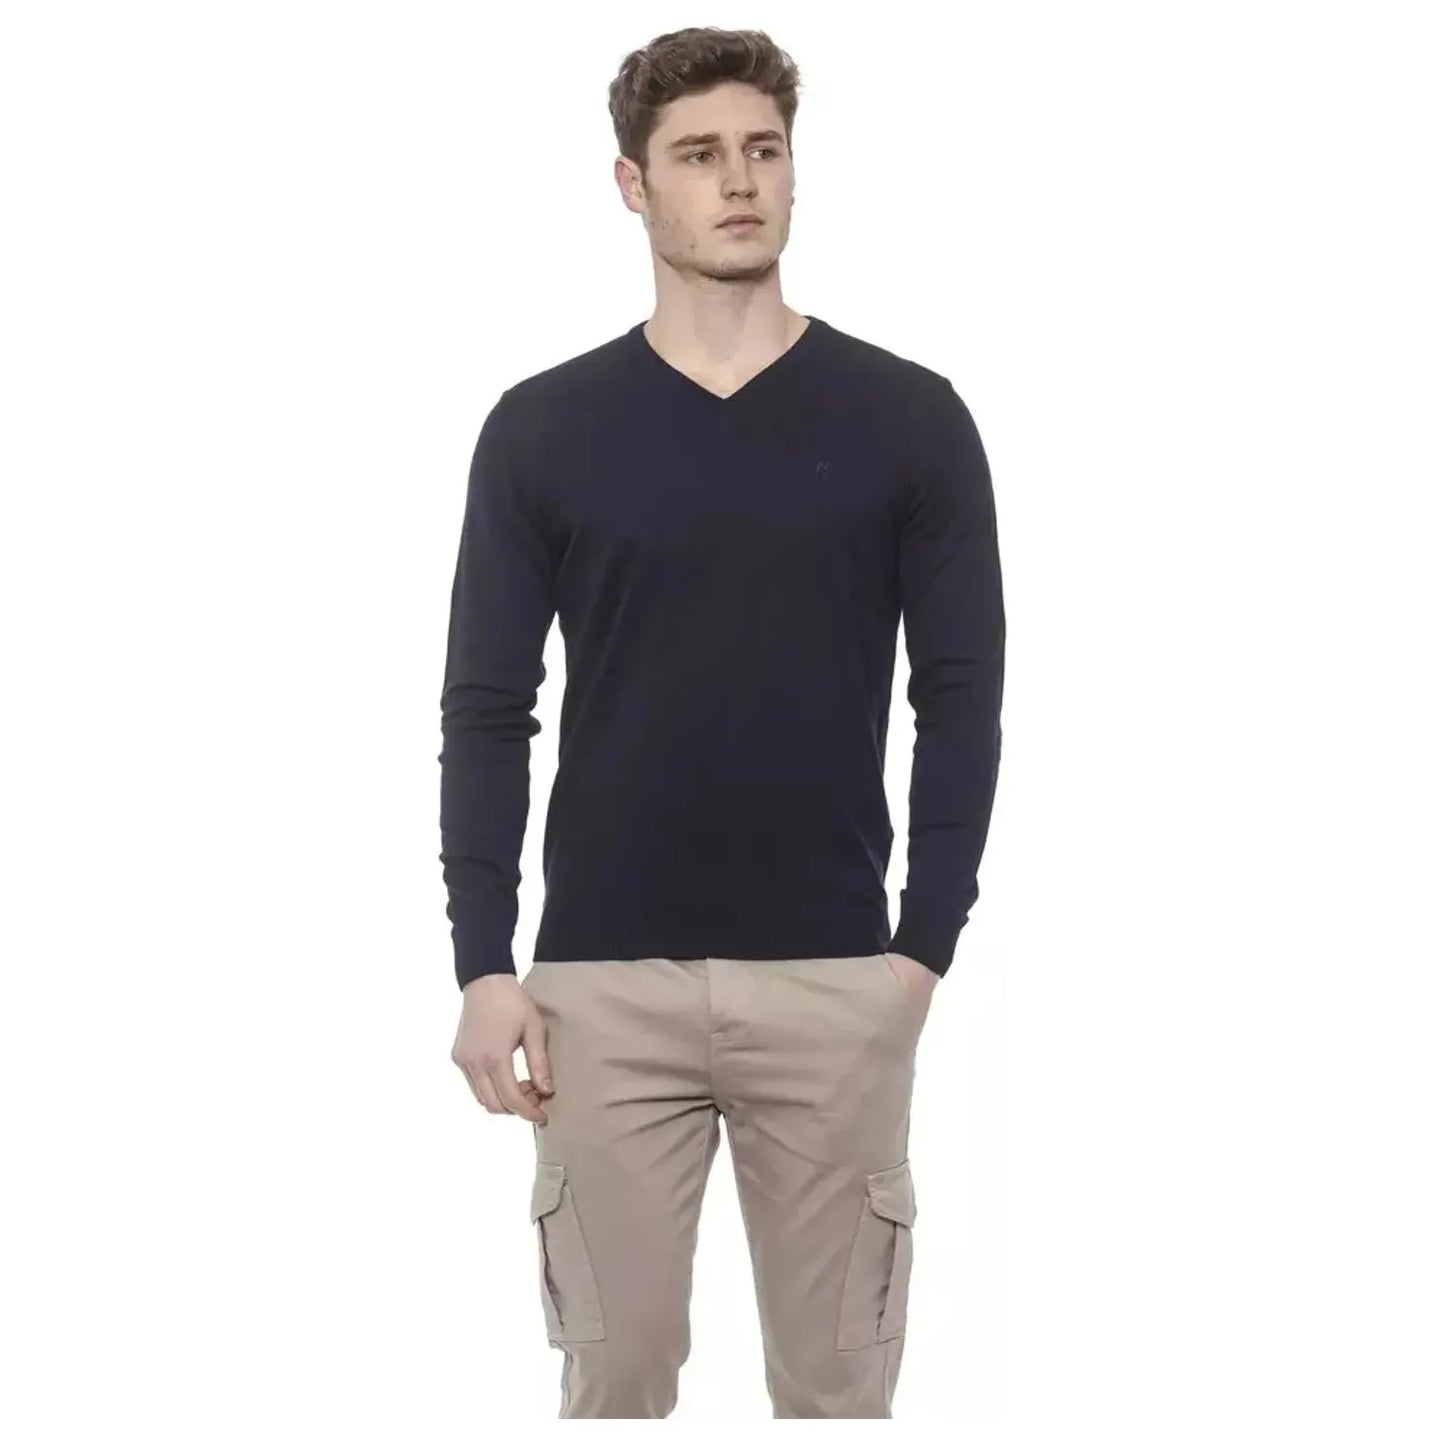 Conte of Florence Elegant V-Neck Cotton Sweater for Men prussianblue-sweater-1 stock_product_image_20335_2101837261-28-22a3ceec-a88.webp